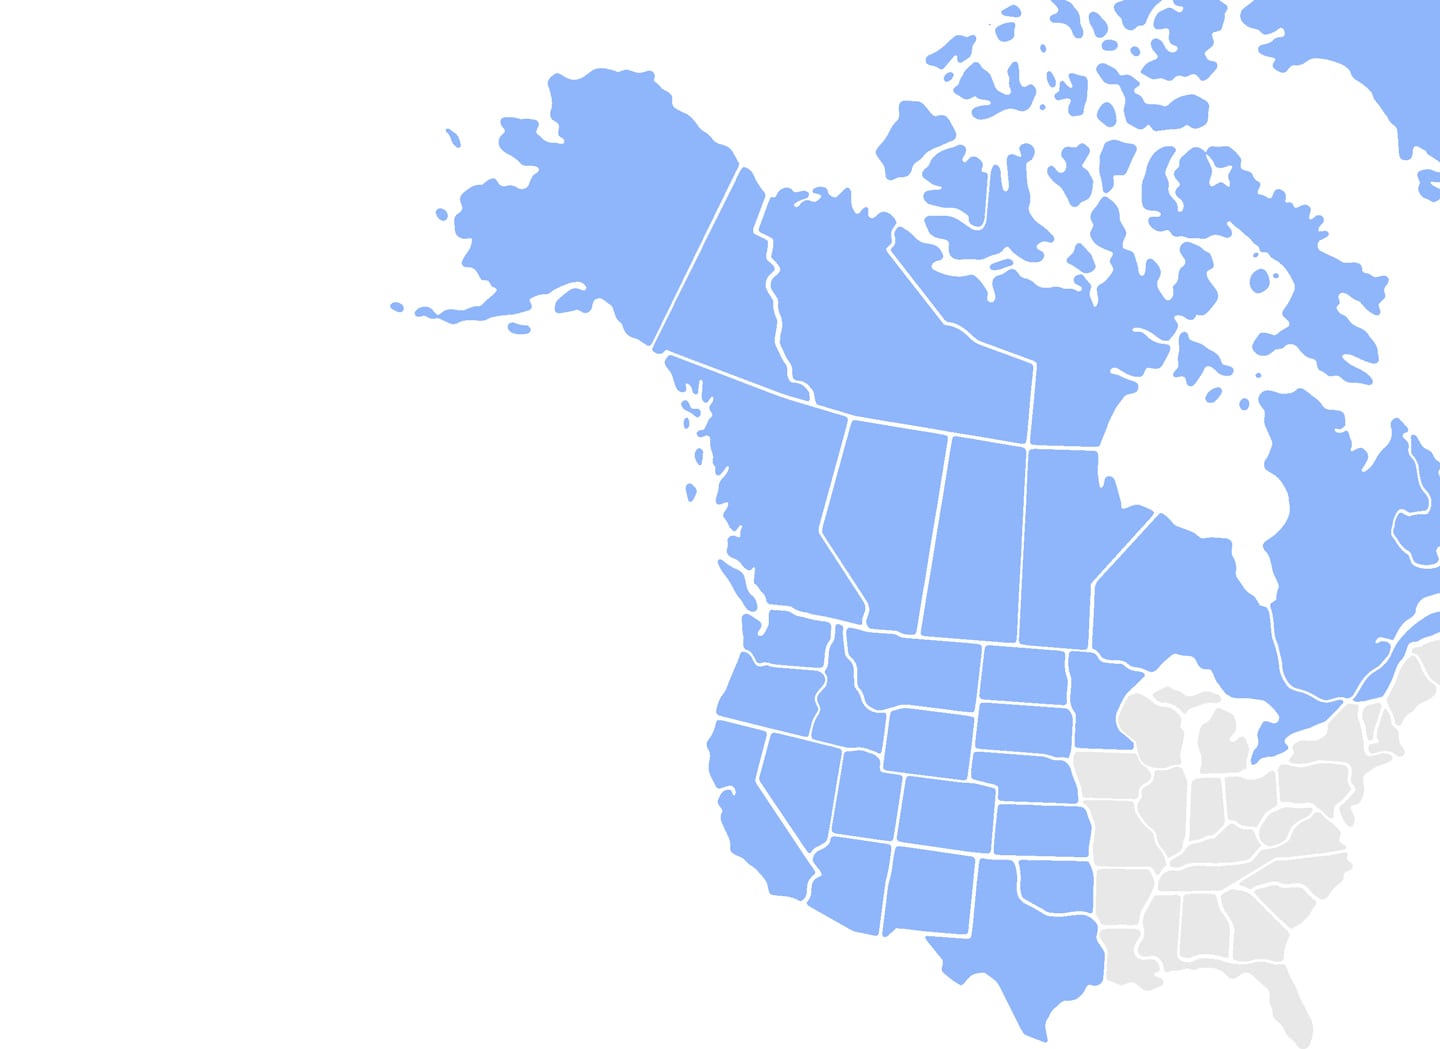 West Region and Canada highlighted in blue